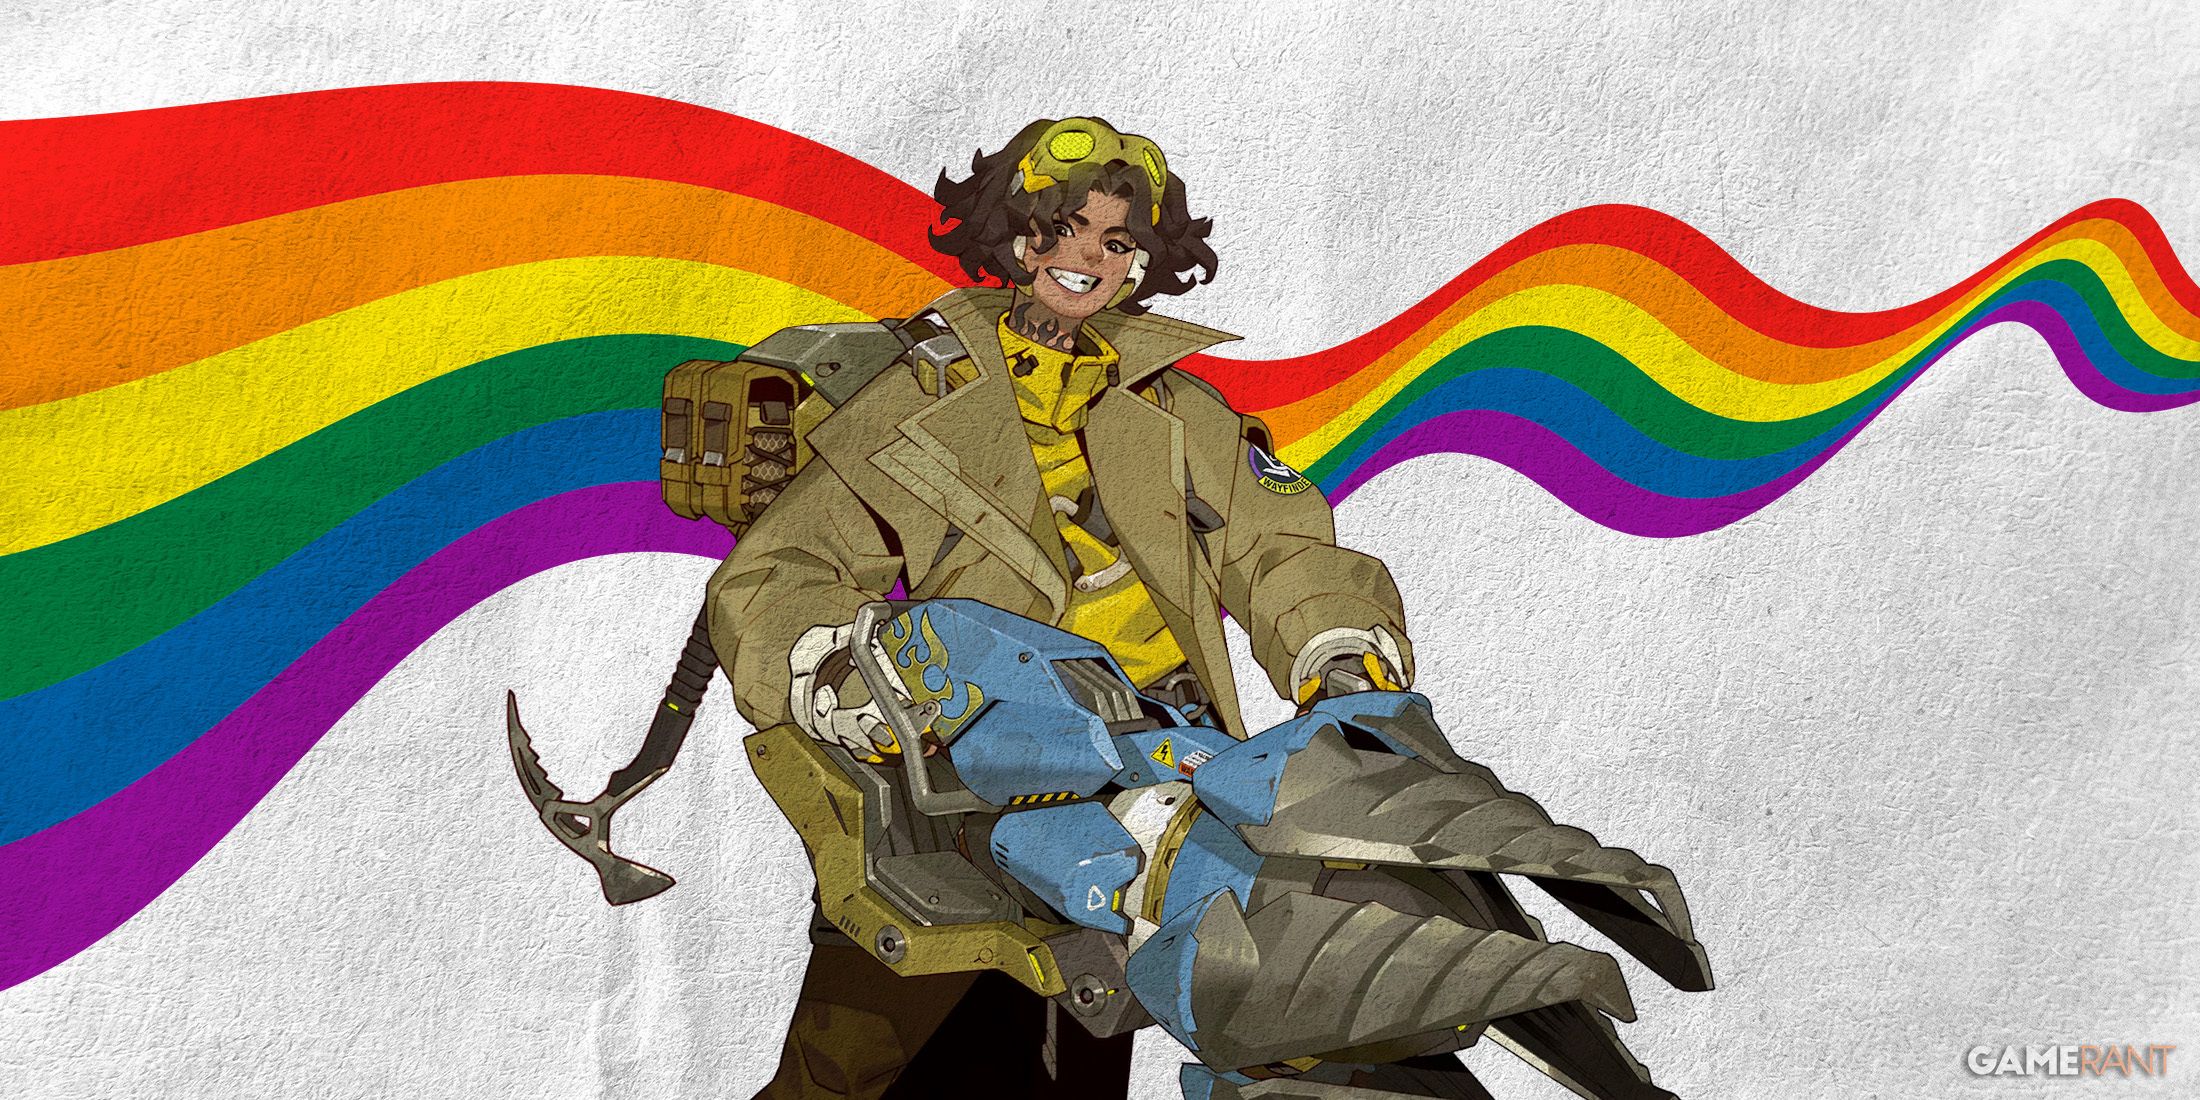 Overwatch 2's Venture and pride flag